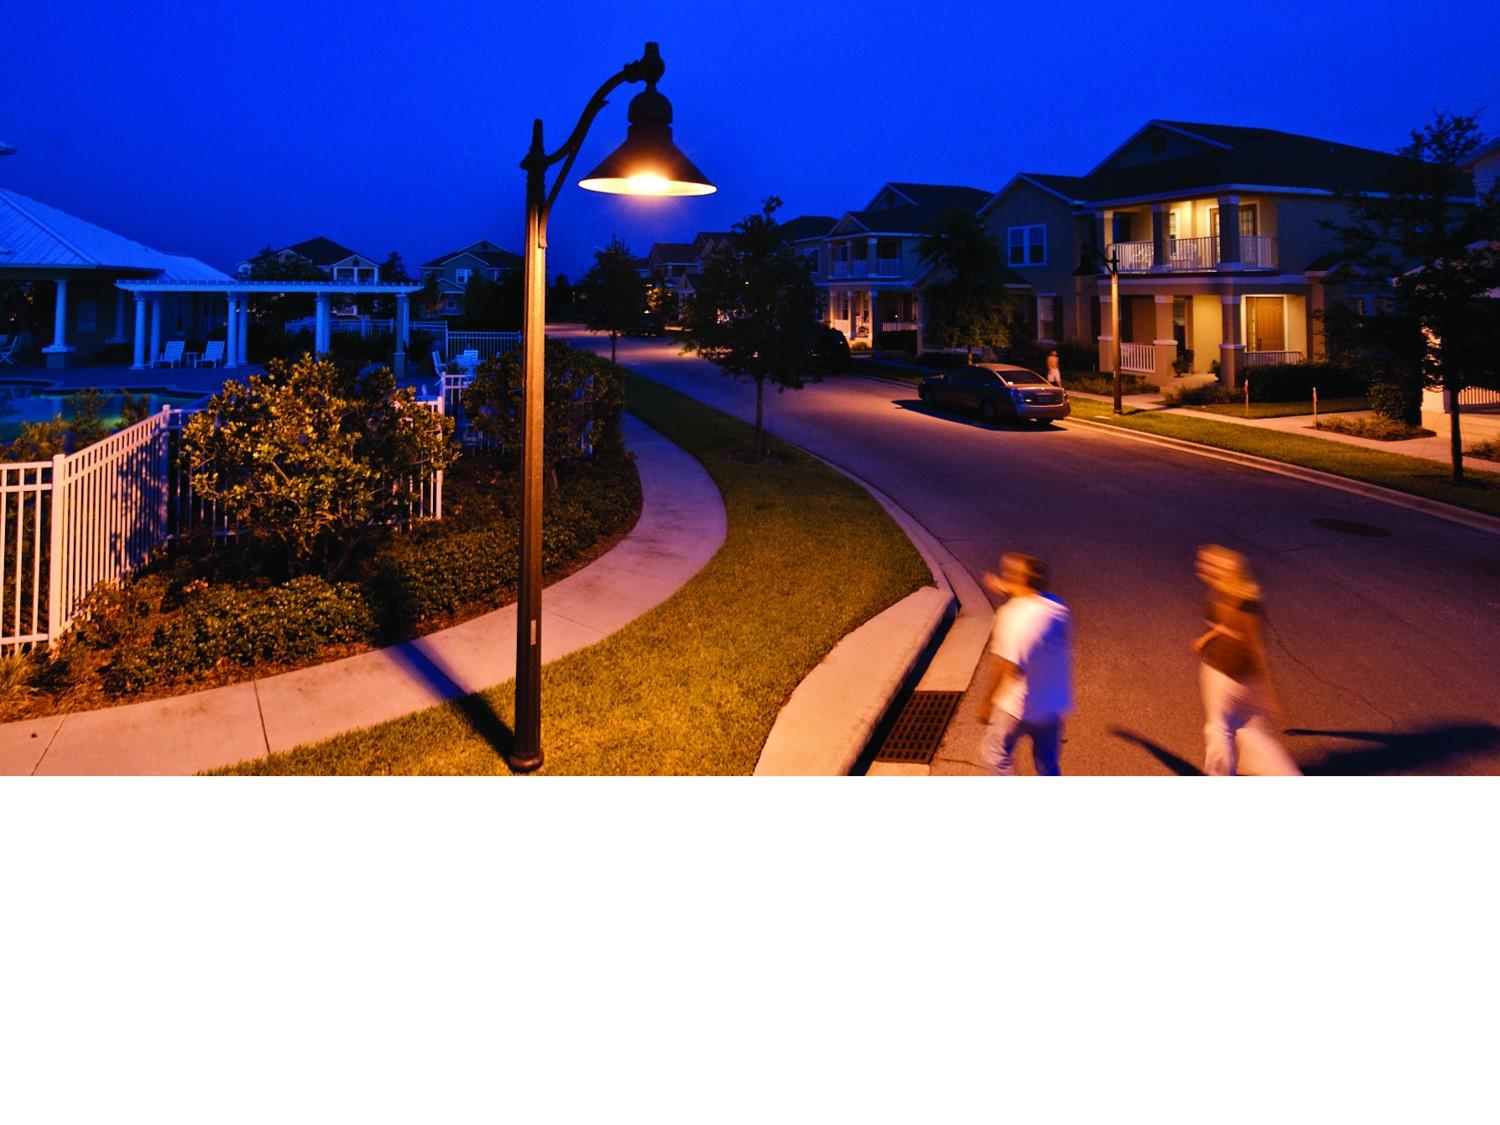 Warm residential street lighting at night with two people walking past 